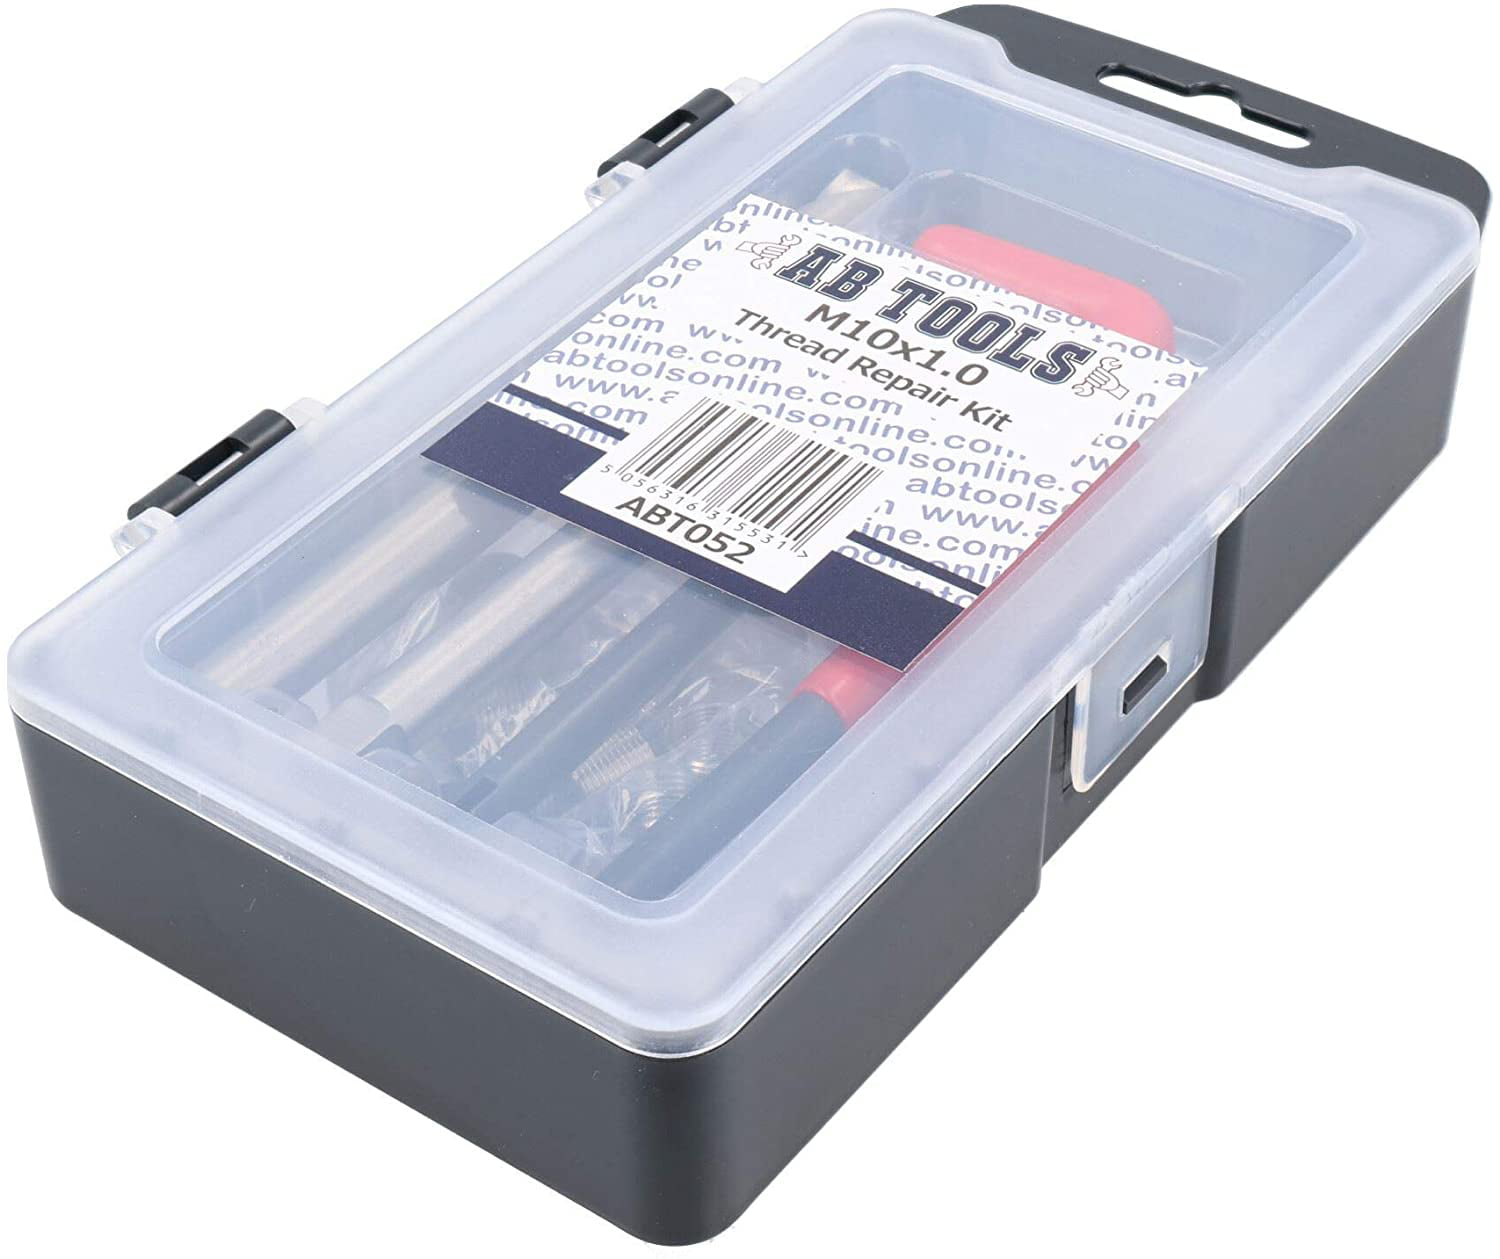 Helicoil 9pc Set Damaged AN043 for sale online M10 X 1.0mm Thread Repair Kit 